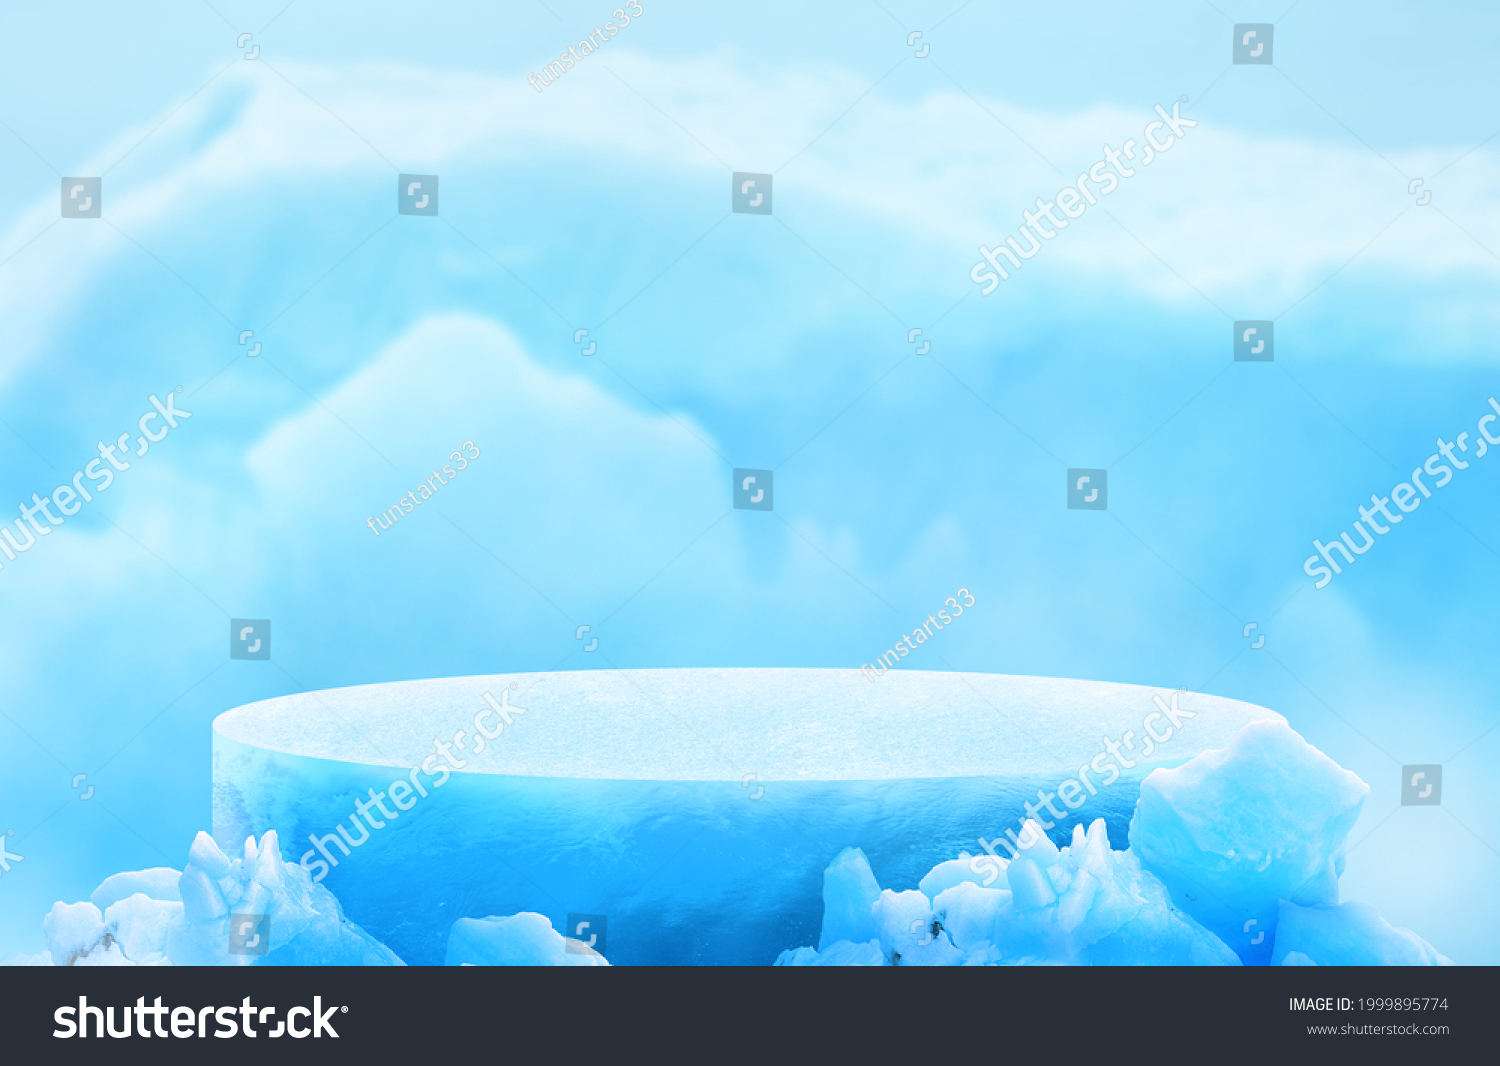 Glacier ice podium for mockup display or presentation of products. Advertising theme concept. #1999895774